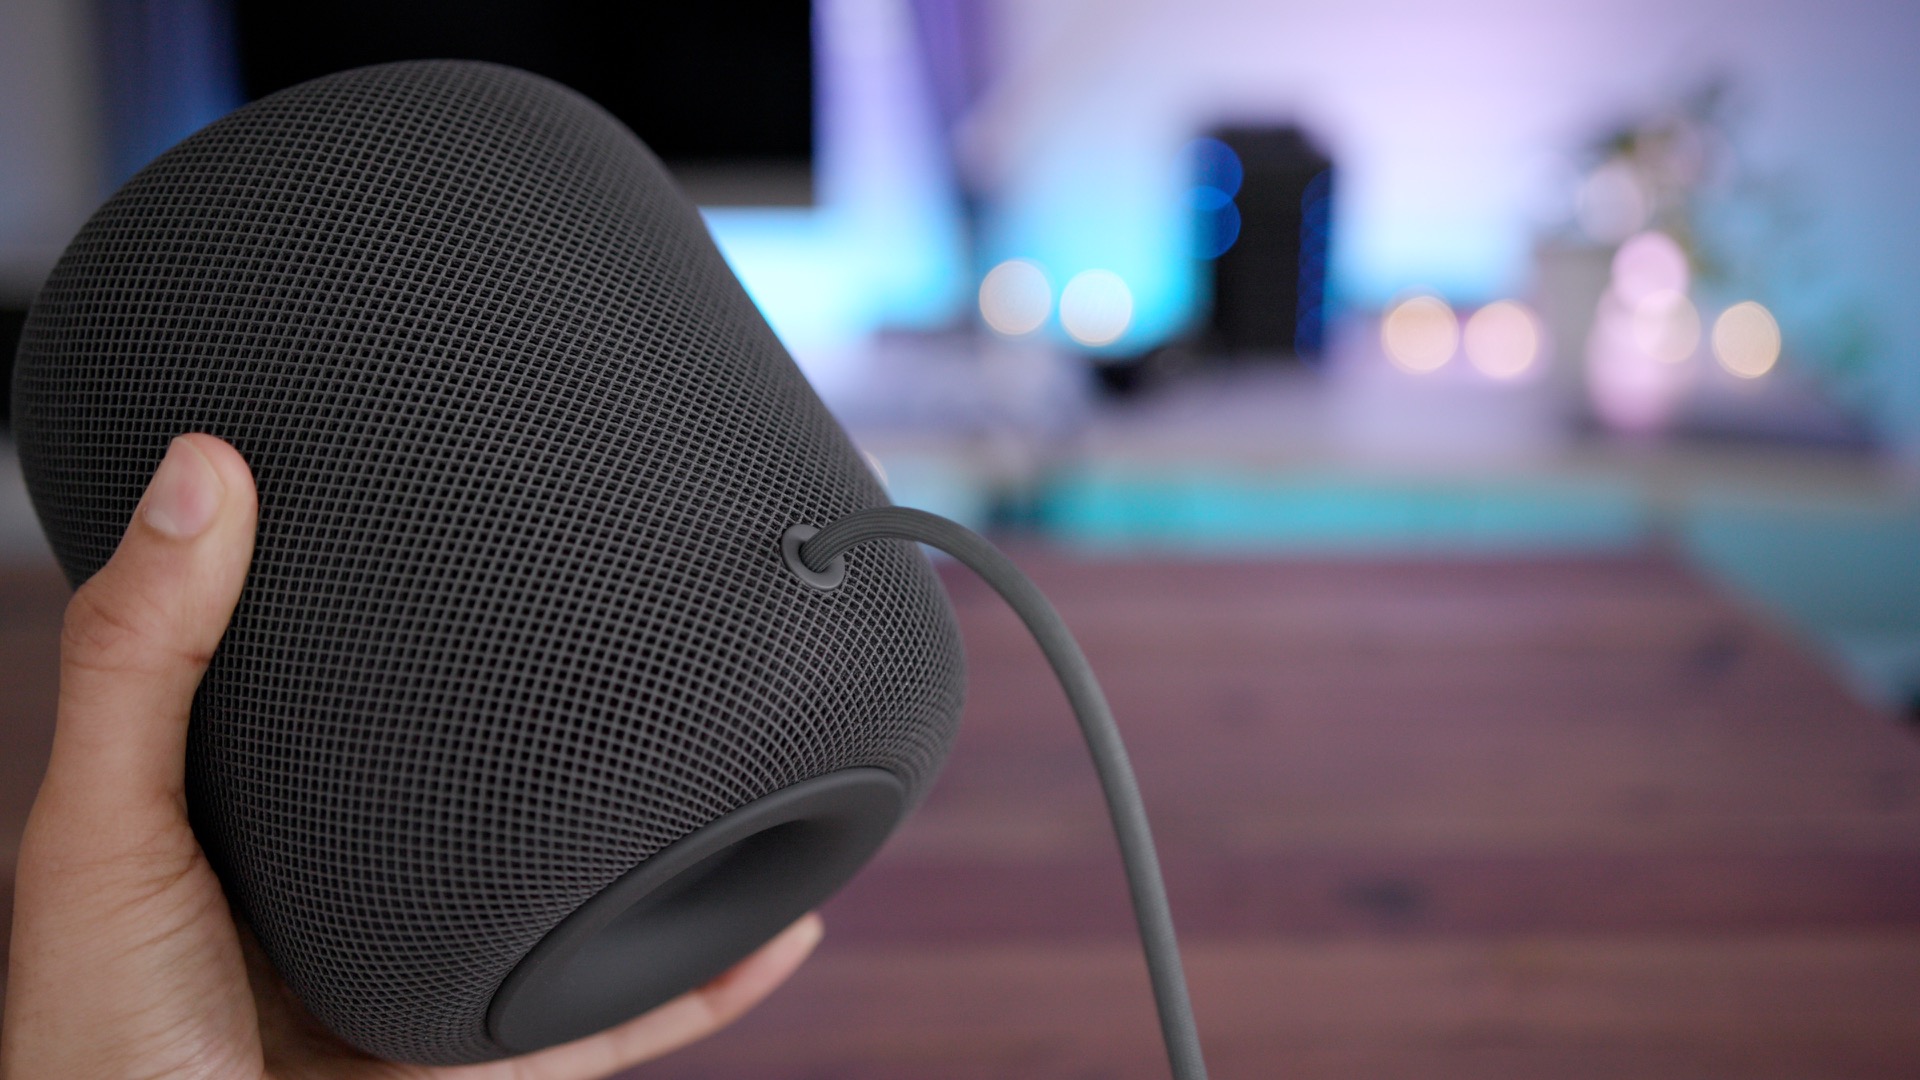 how to airplay from mac to homepod